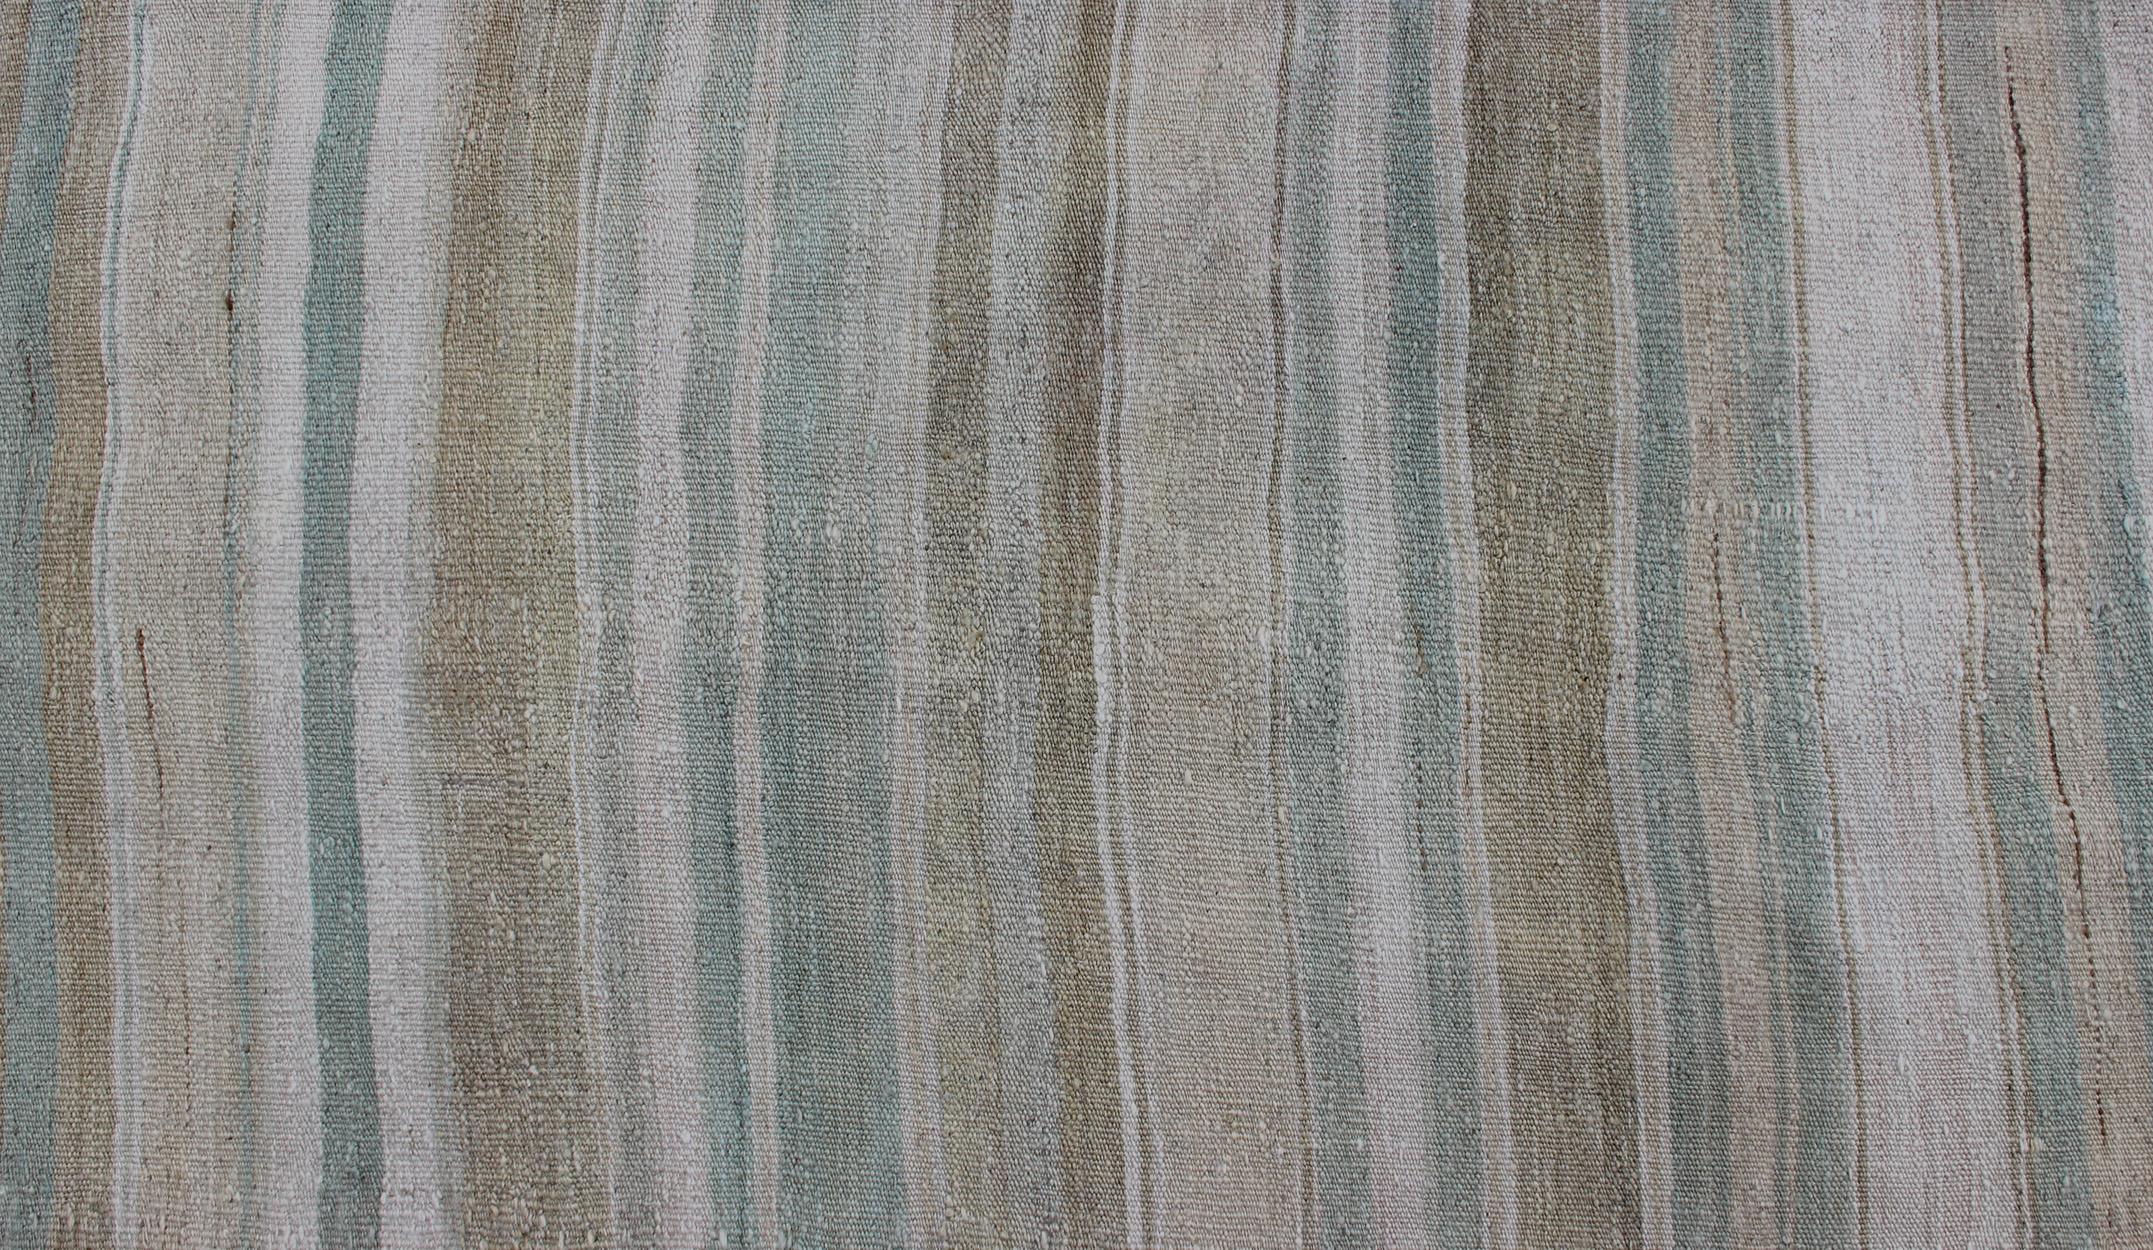 Wool Vintage Turkish Flat-Weave Runner with Stripe Design Cream and Light Green For Sale